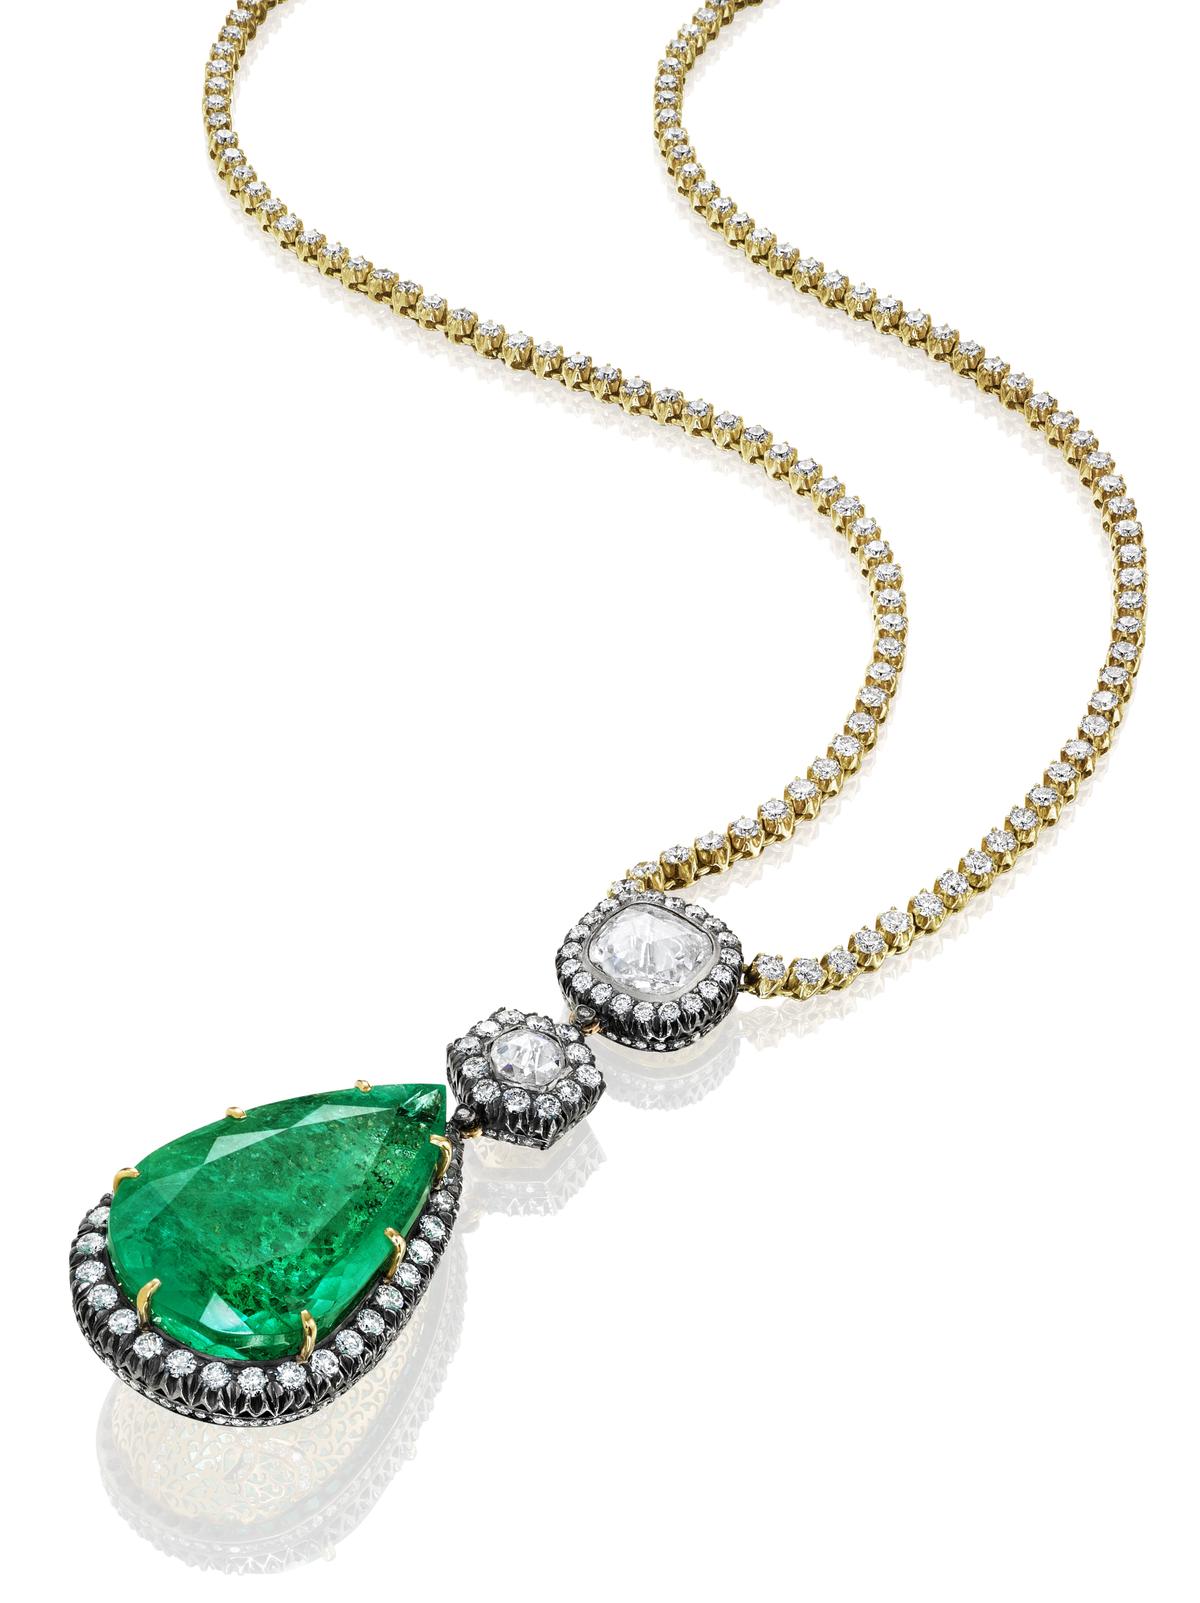 Kunis drop pendant with a pair of 2.5-carat rose-cut diamonds and a 65-carat pear-shaped Colombian emerald, suspended on a line of 12 carats of diamonds. (Courtesy of Sanjay Kasliwal)